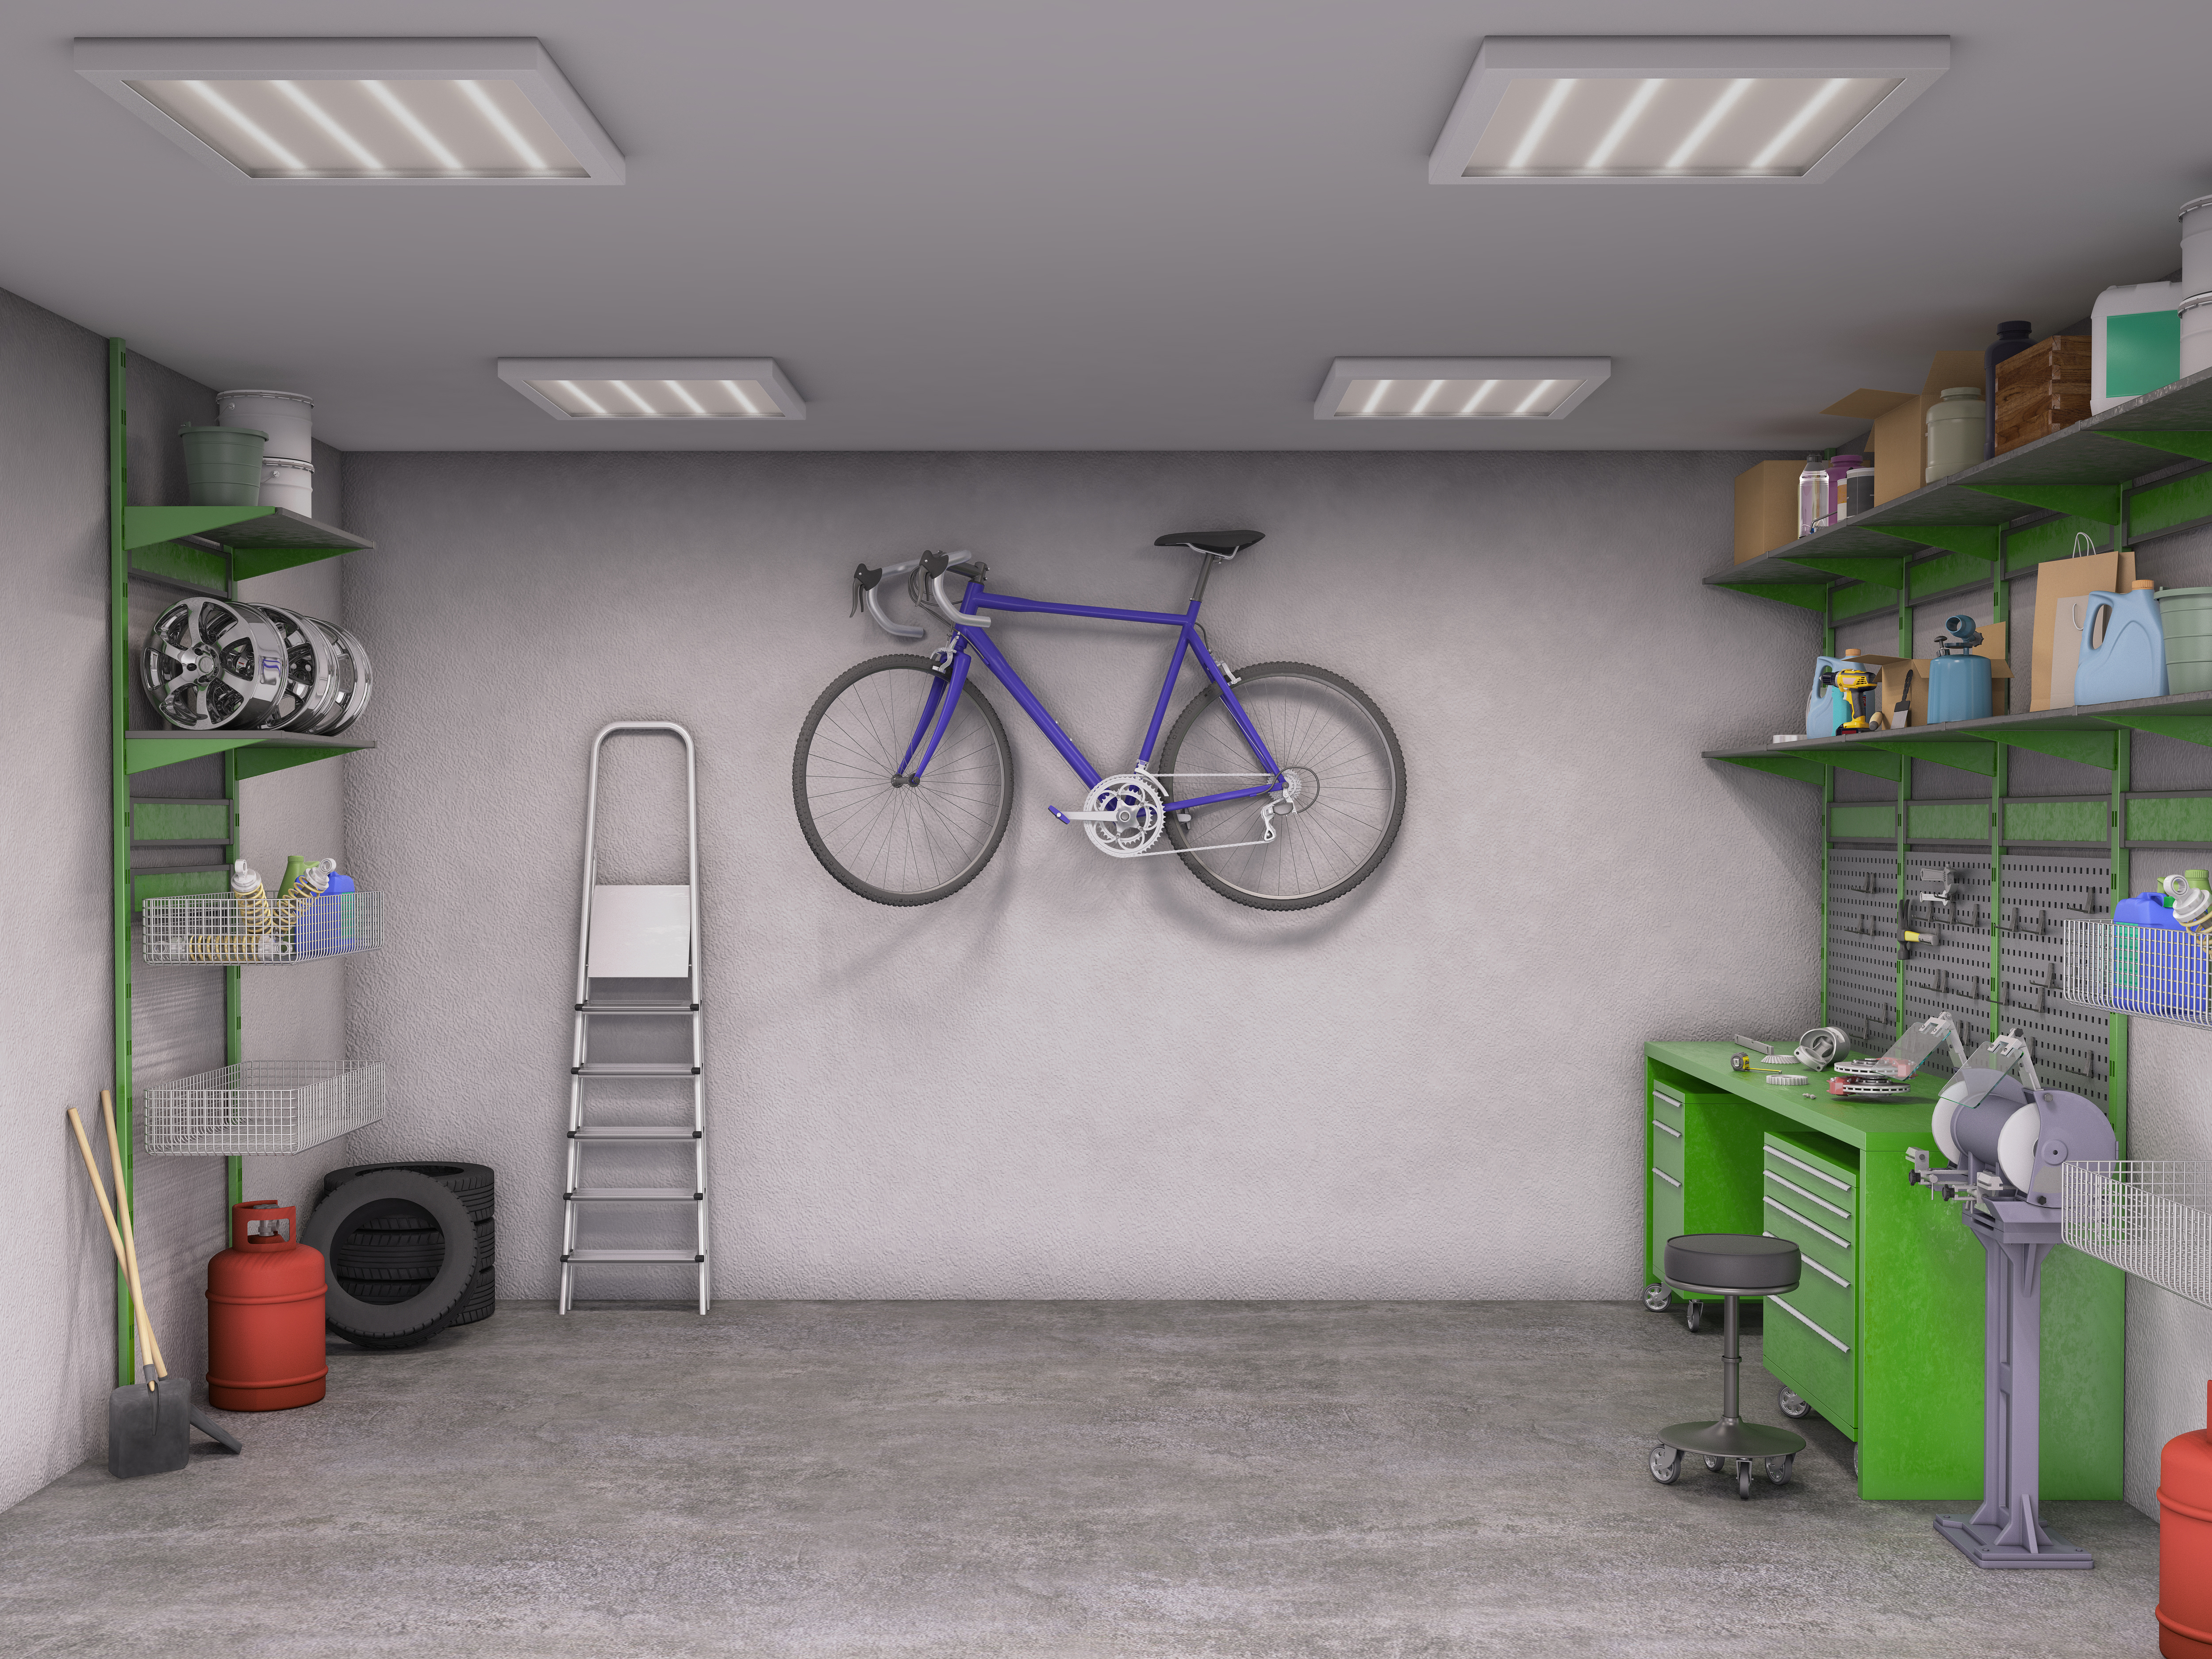 Inside of a garage with shelves and a bicycle hanging from the wall